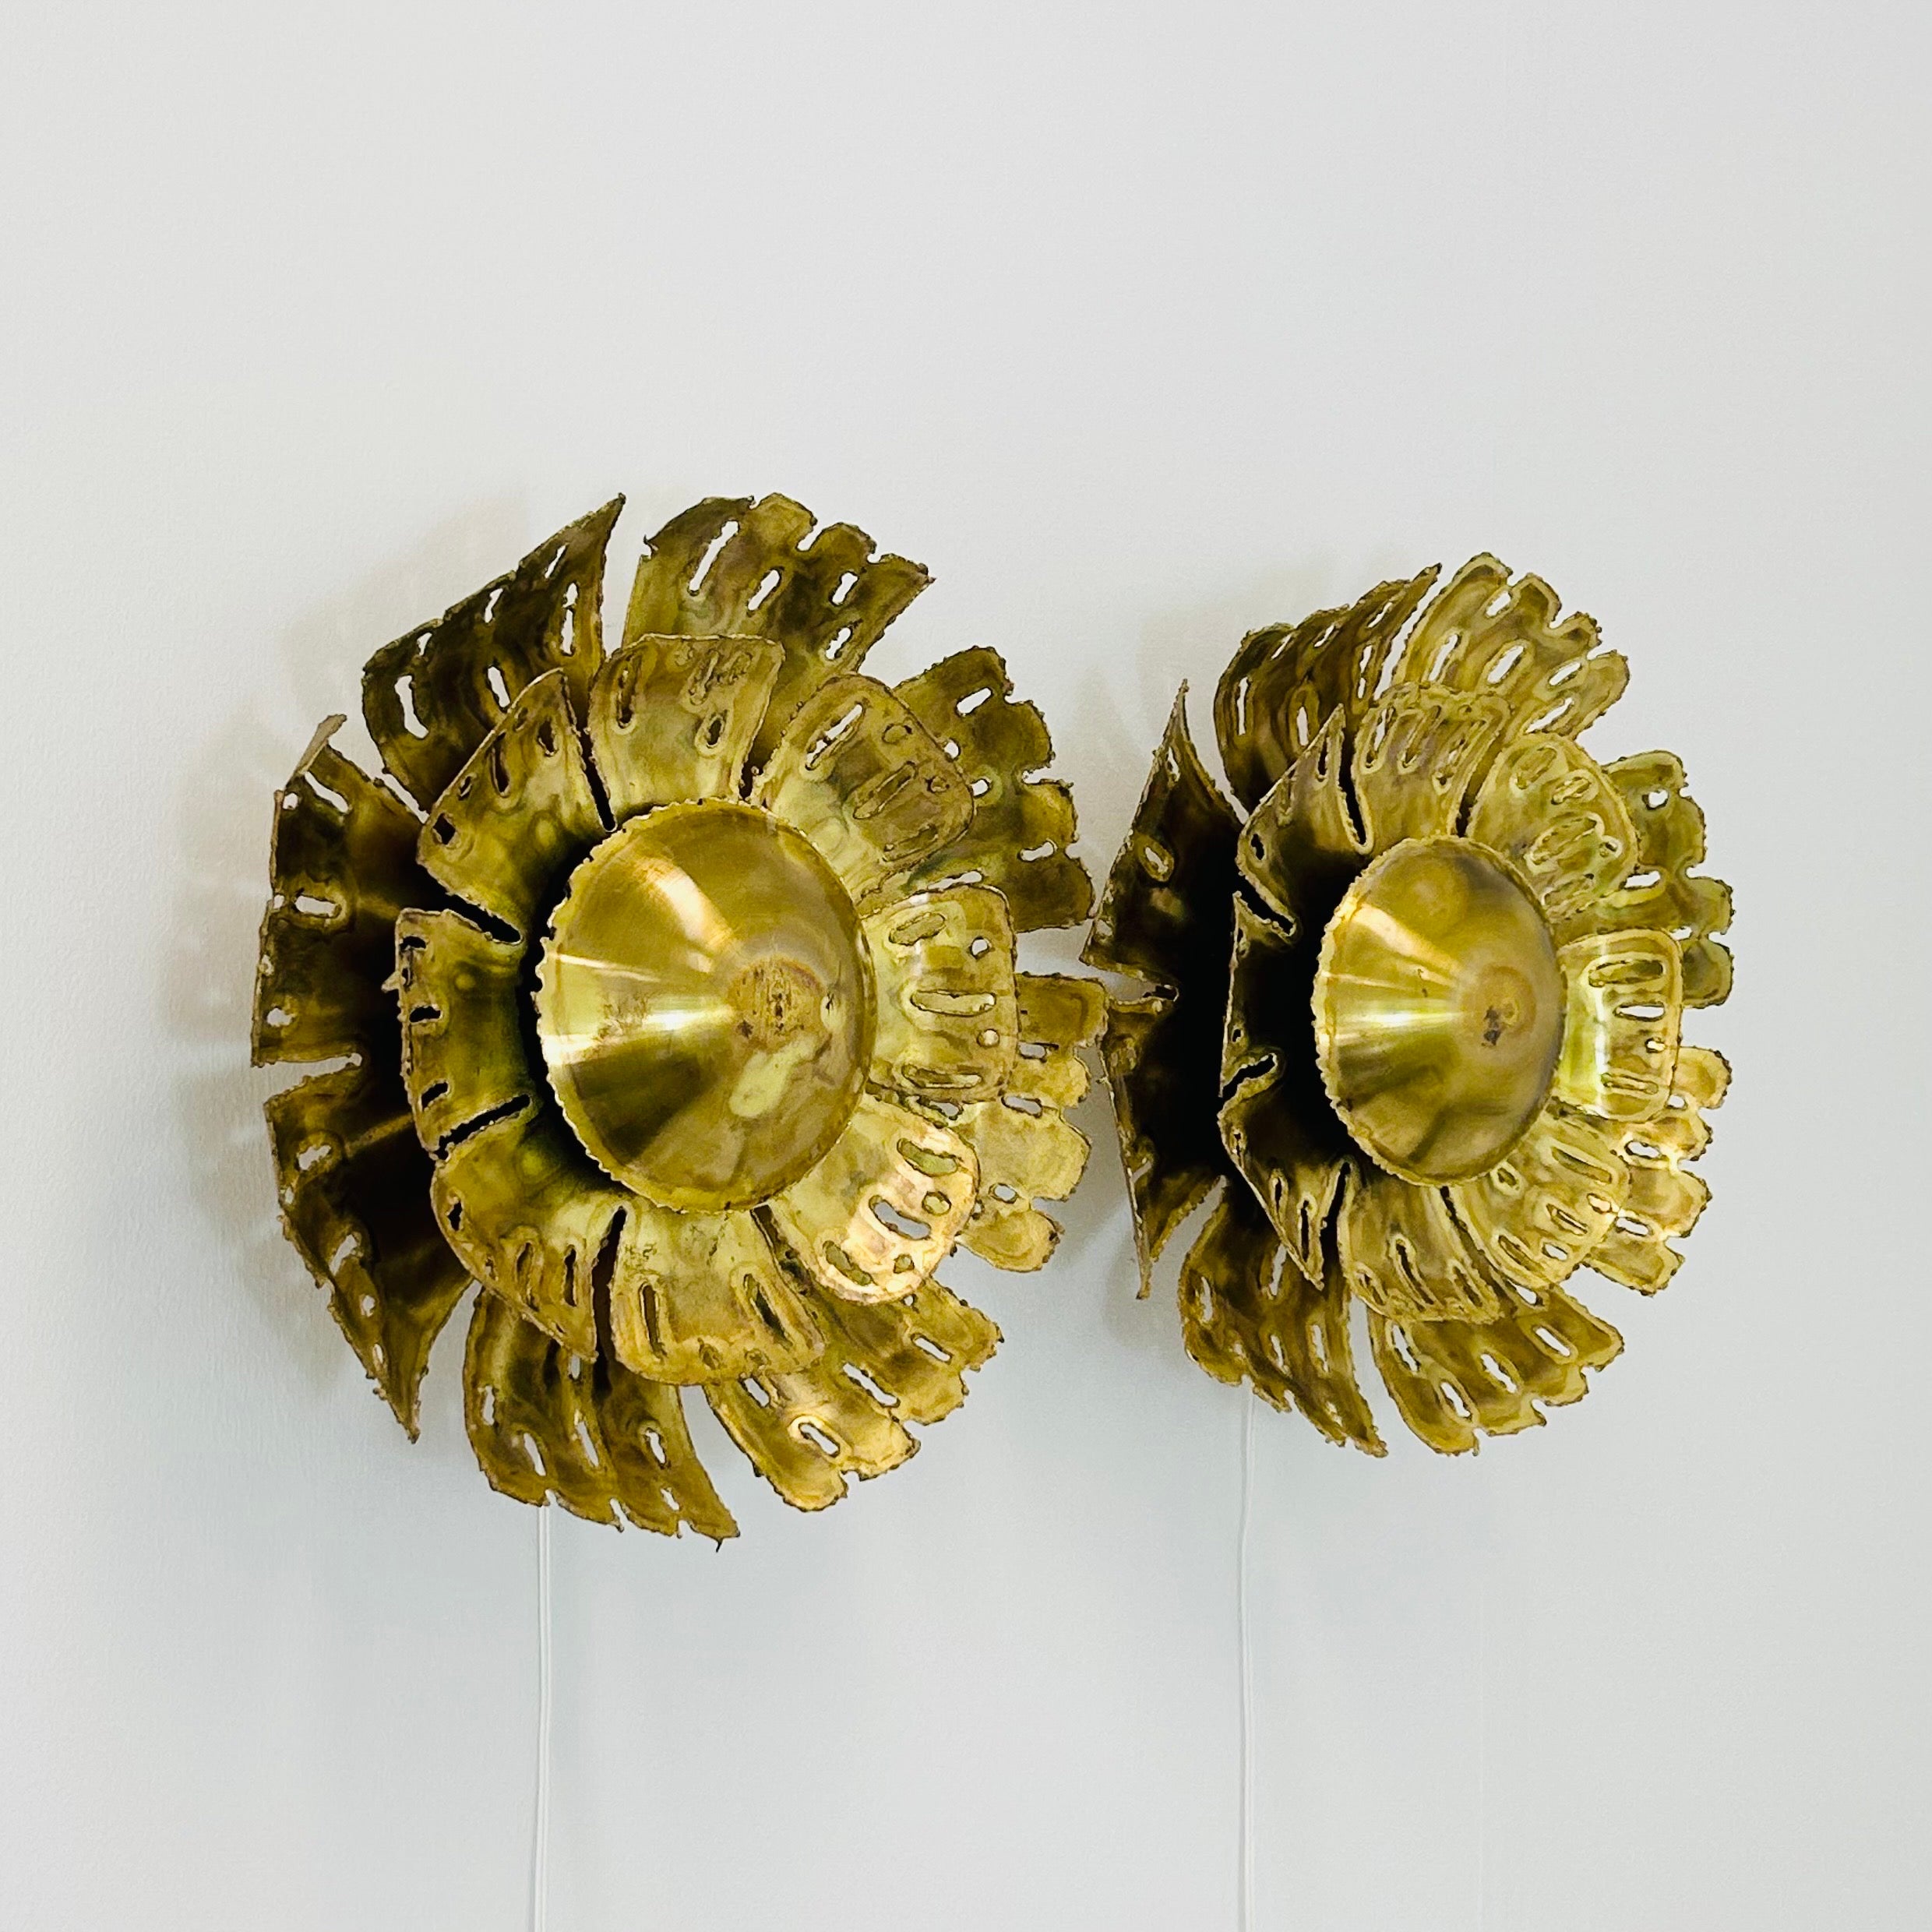 A pair of substantial sun-shaped brass wall lamps designed by Svend Aage Holm Sørensen in the 1960s. Produced by his company Holm Sørensen & Co., this eye-catching style no. 5207 is a true masterpiece and trademark of the Danish designer. Finding a